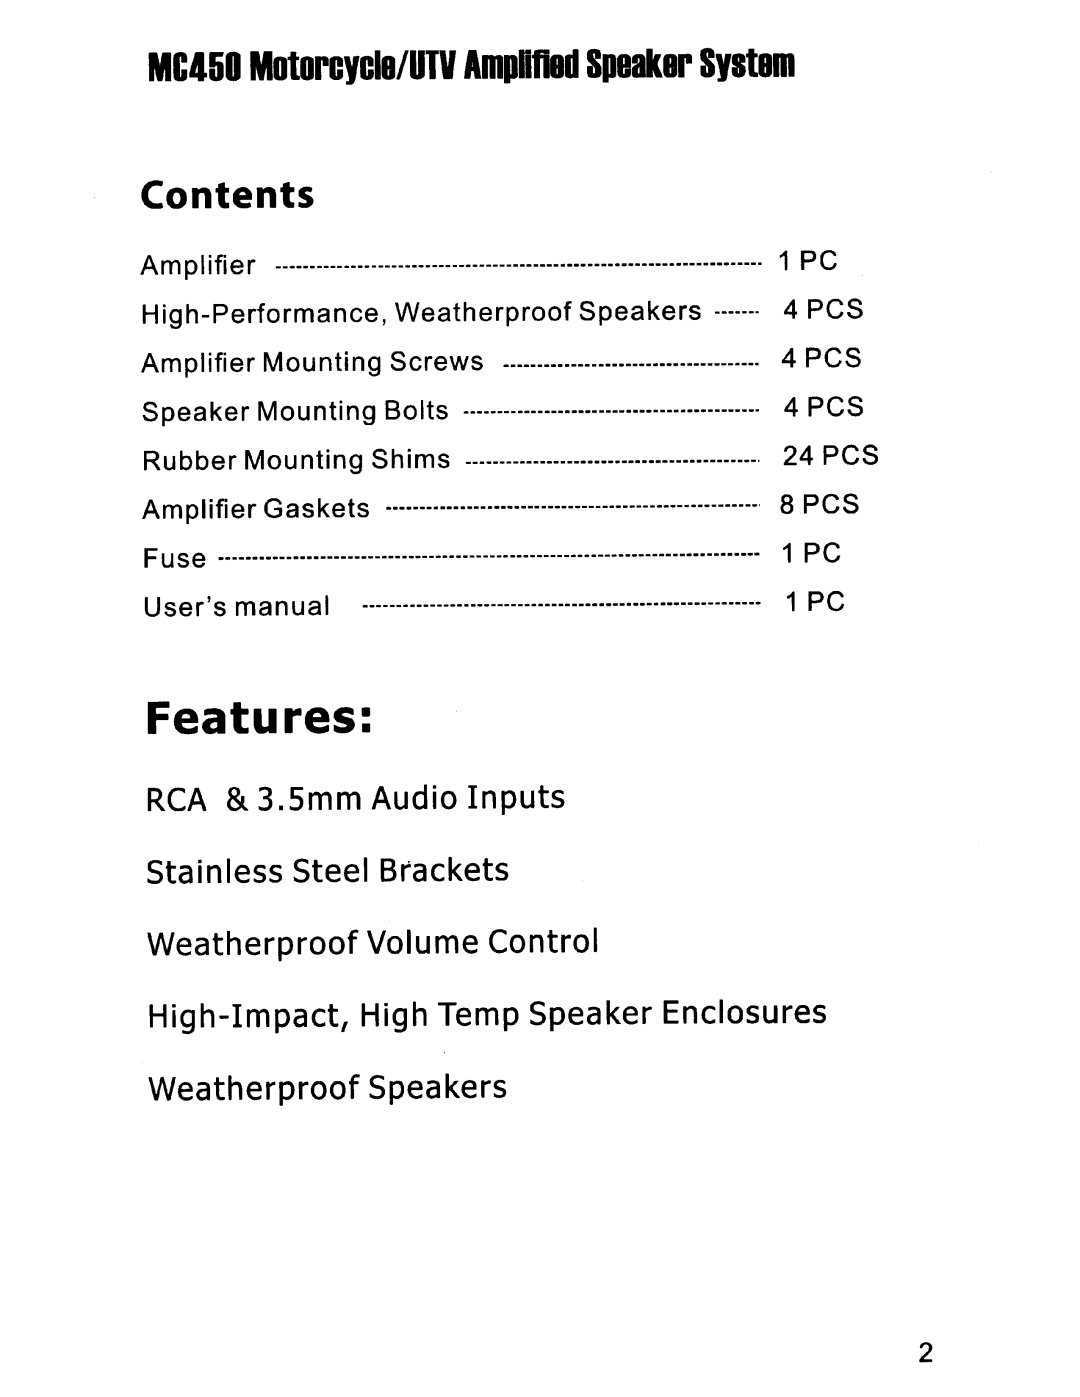 Boss Audio Systems MC450 user manual System, Features, Contents 